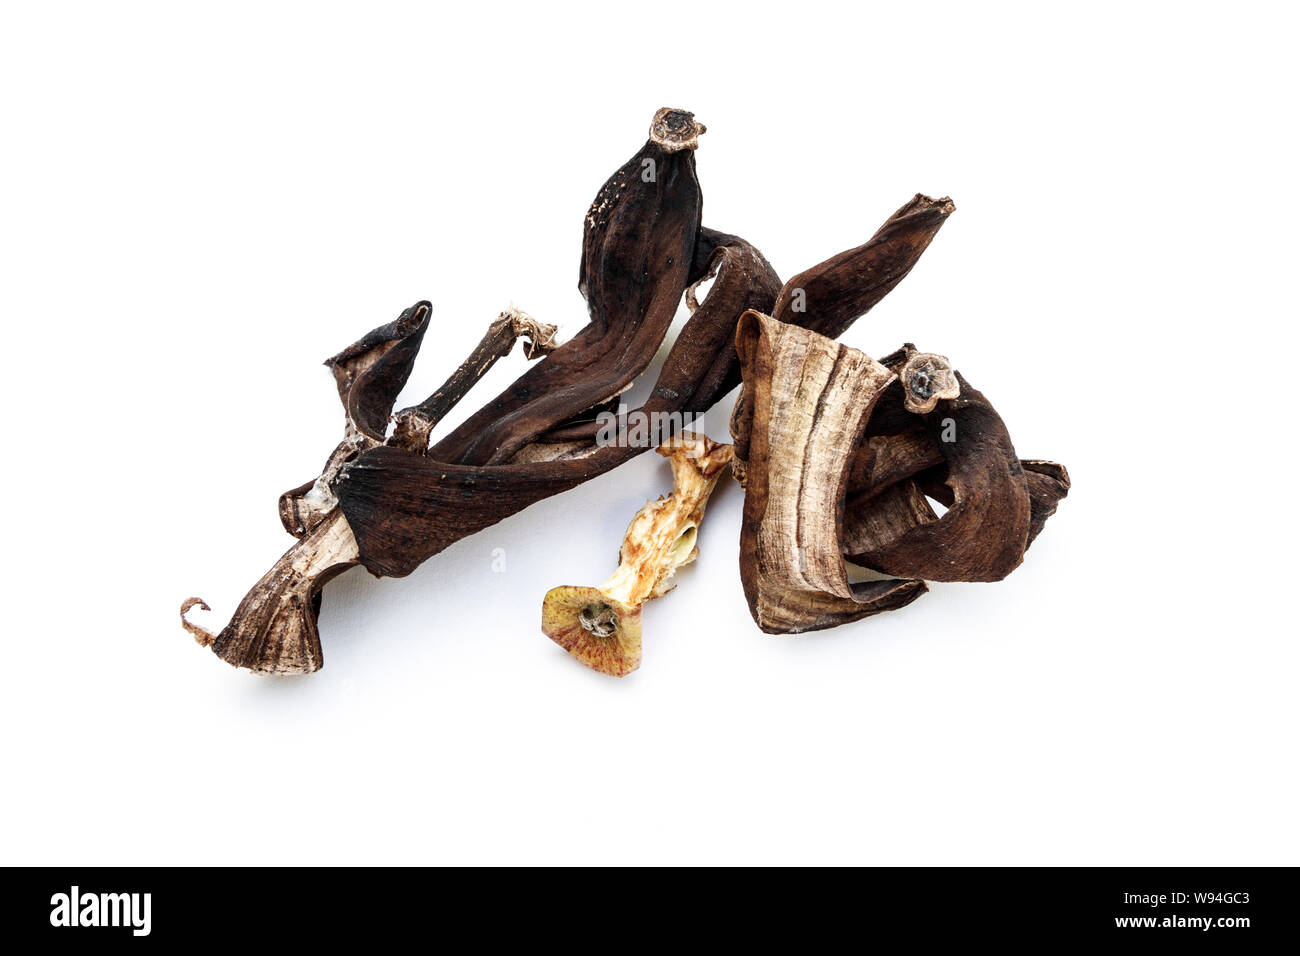 Dried and mouldy apple core and banana skin on a white background Stock Photo